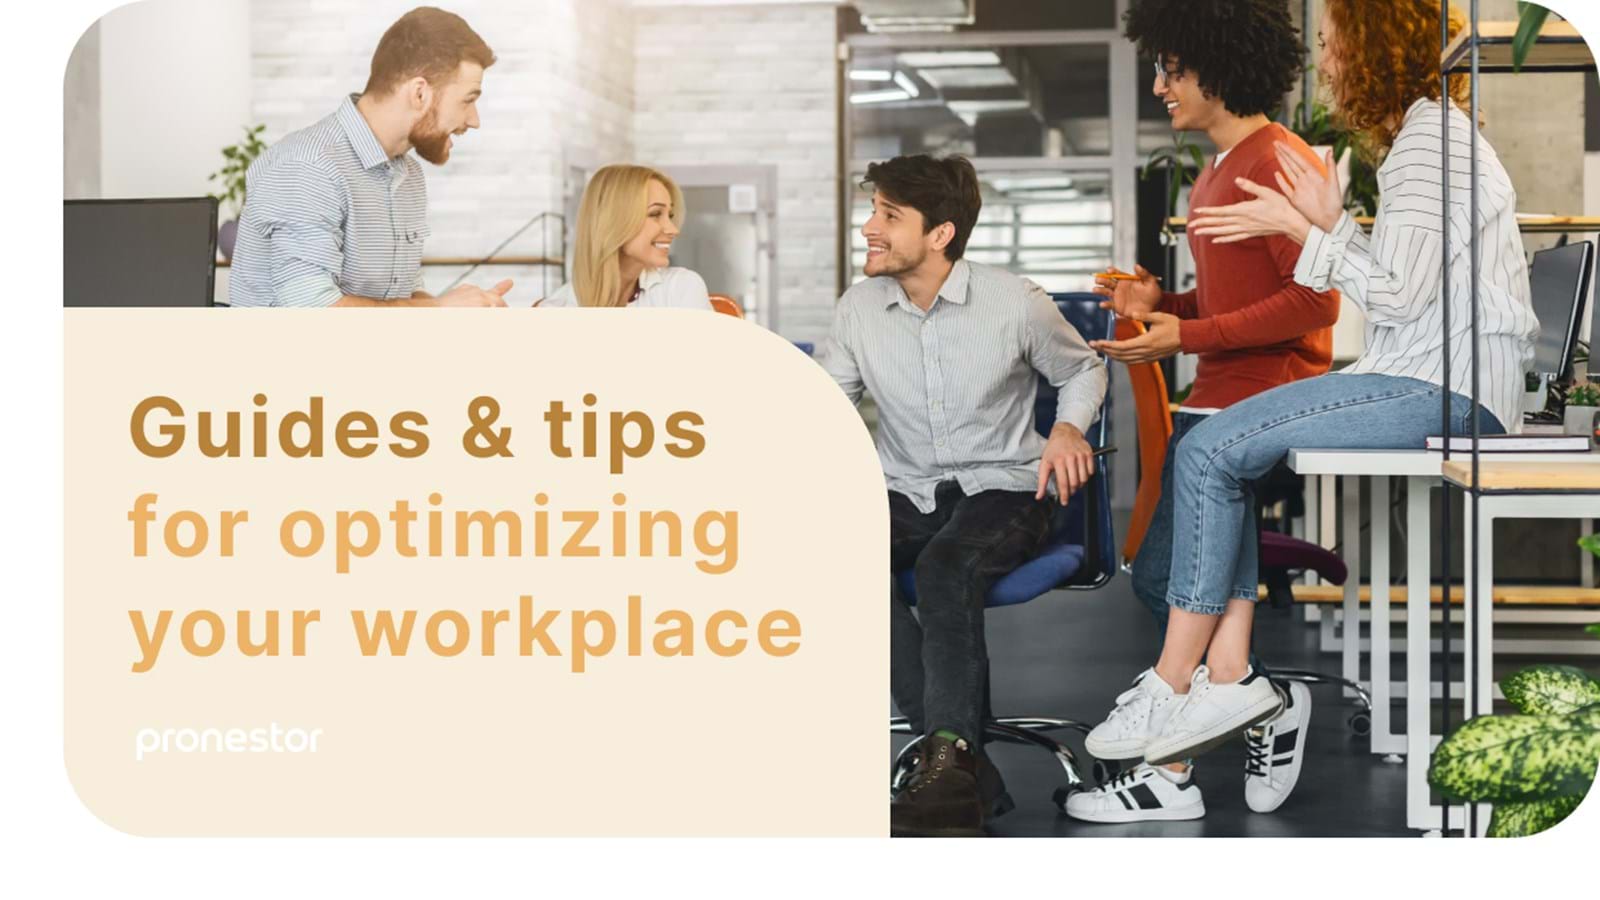 3 Benefits Of A Hybrid Workplace